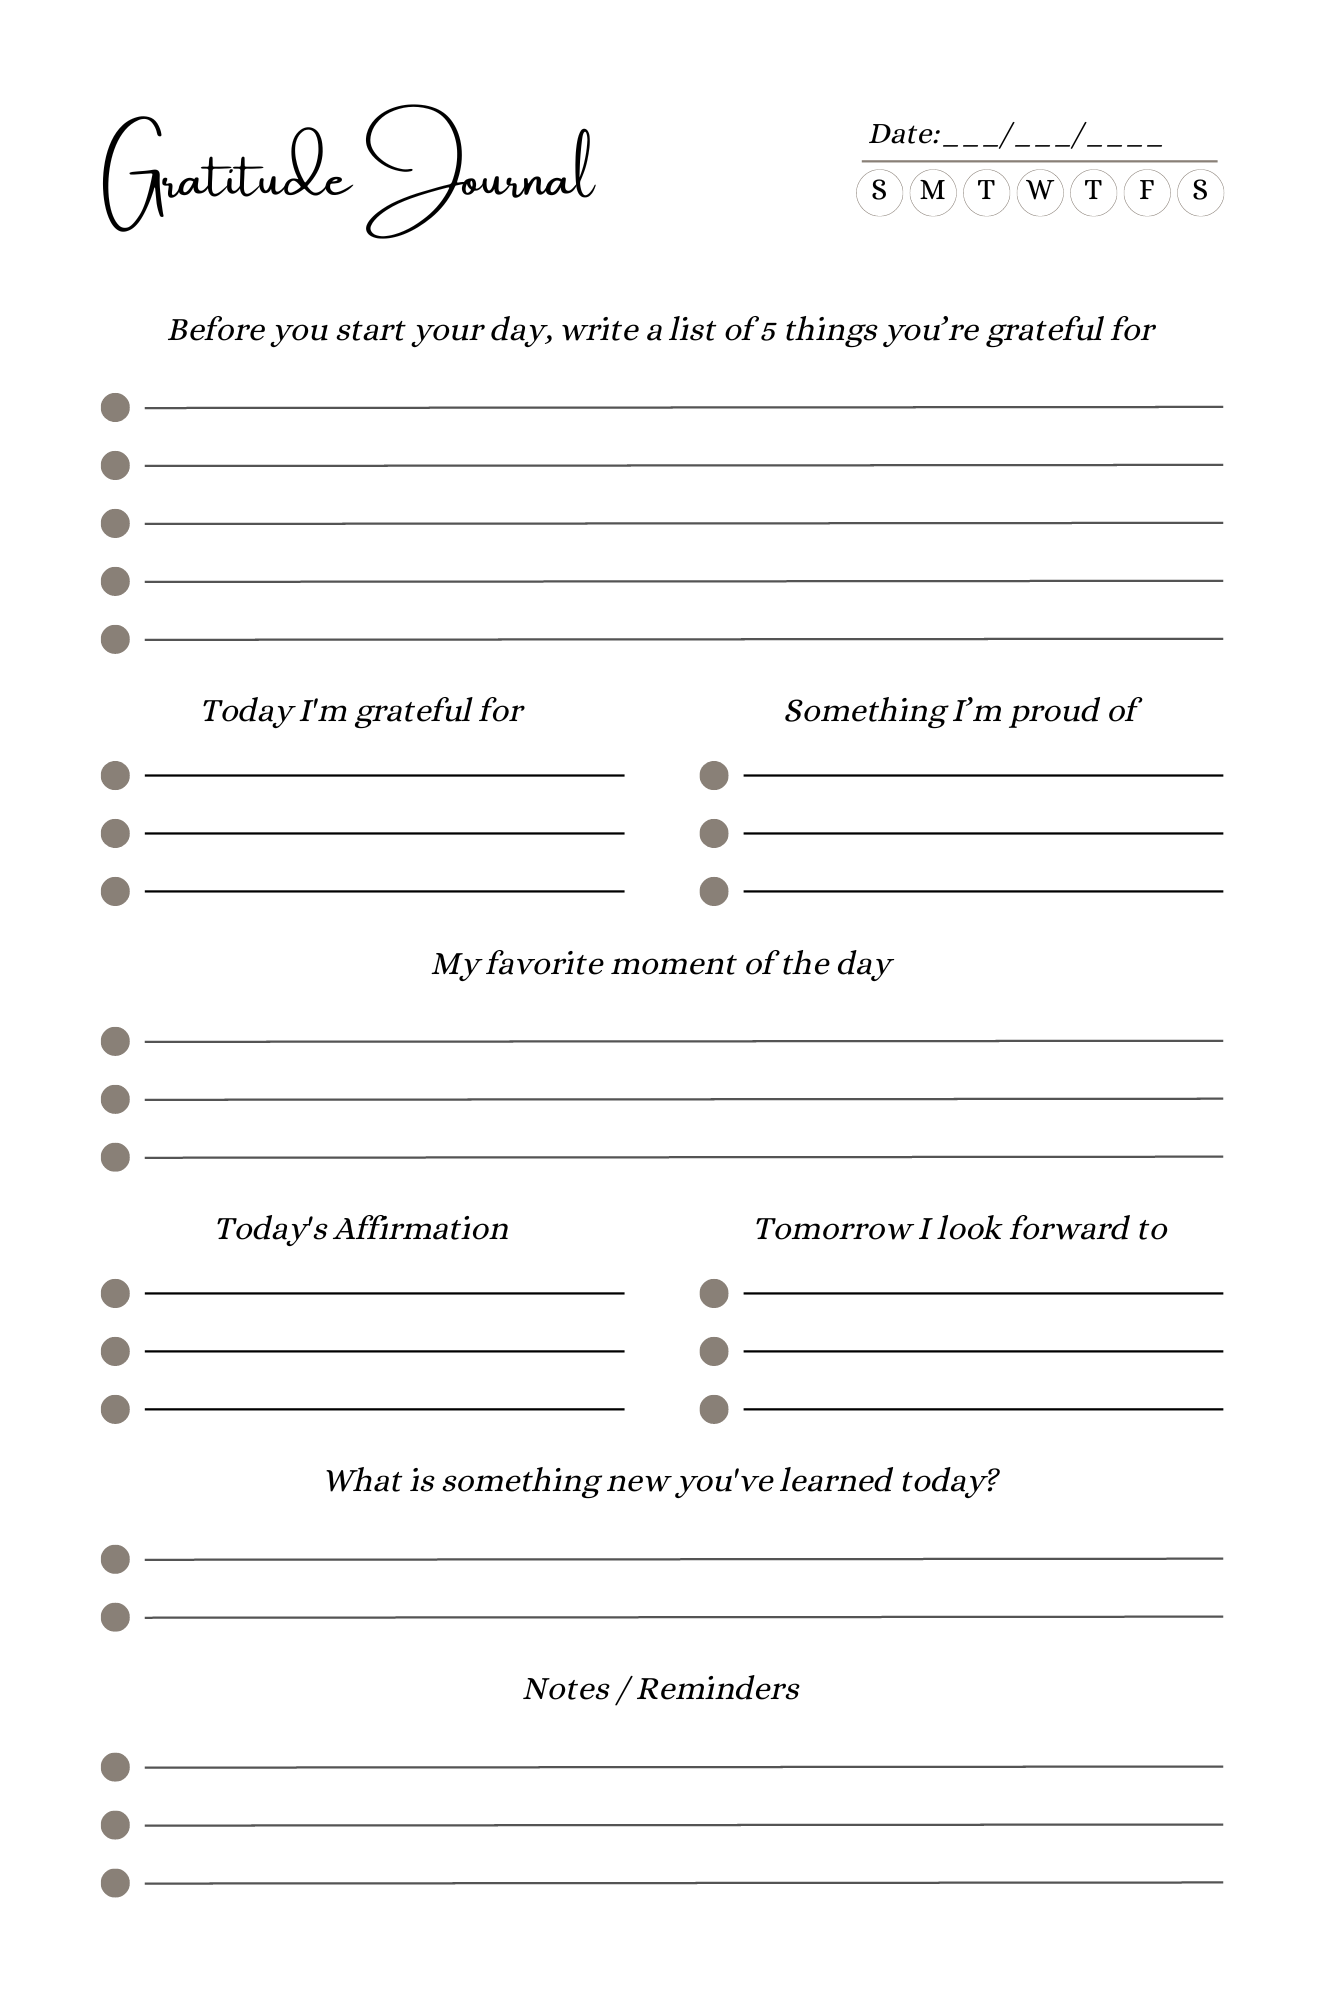 Printable pages of valuable content for download, this journal is more than just a book; it's a tool to help you cultivate a habit of gratitude, reduce stress, and increase your overall well-being. Start each day with a grateful heart and watch how it transforms your perspective.